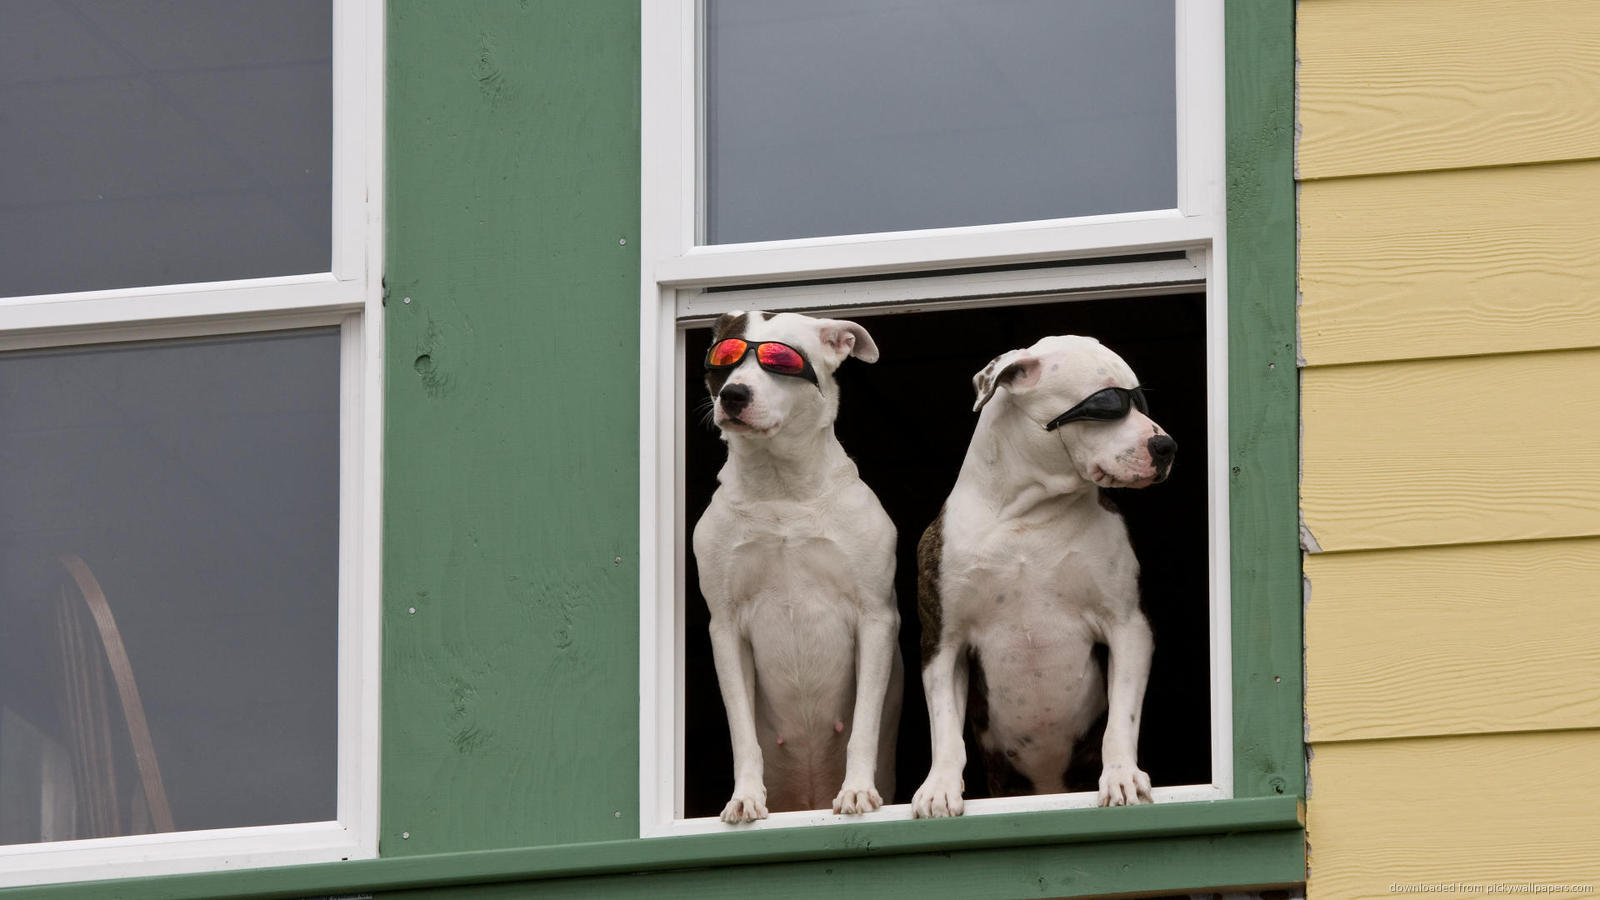 Download 1600x900 Cool Dogs In A Window Wallpaper